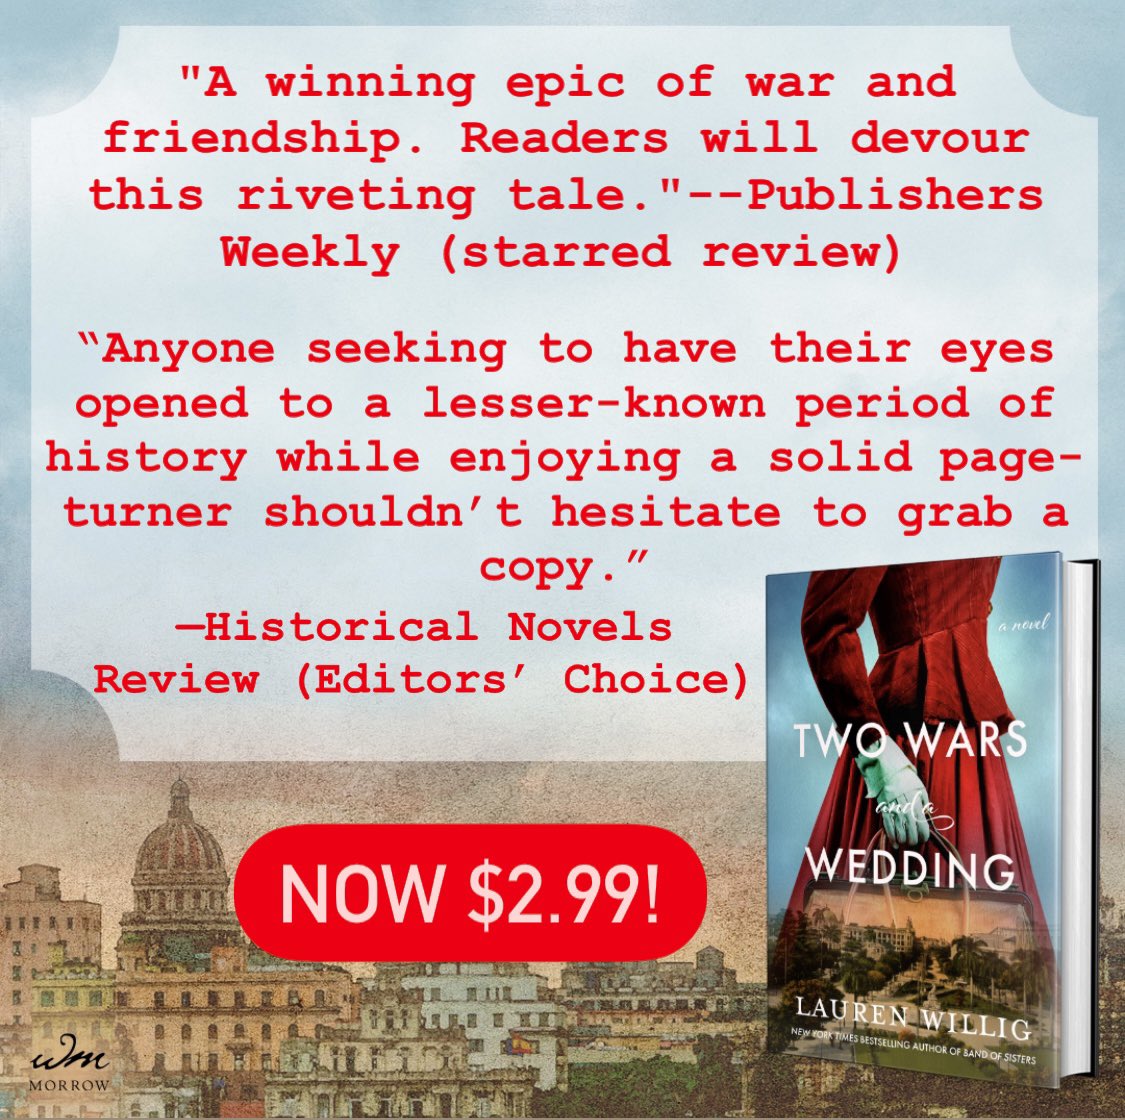 Exciting news! TWO WARS AND A WEDDING is currently reduced to $2.99 across ebook platforms— the first time it’s been on sale! Kindle: tinyurl.com/yc3bxaej Nook: tinyurl.com/3w8zcarm